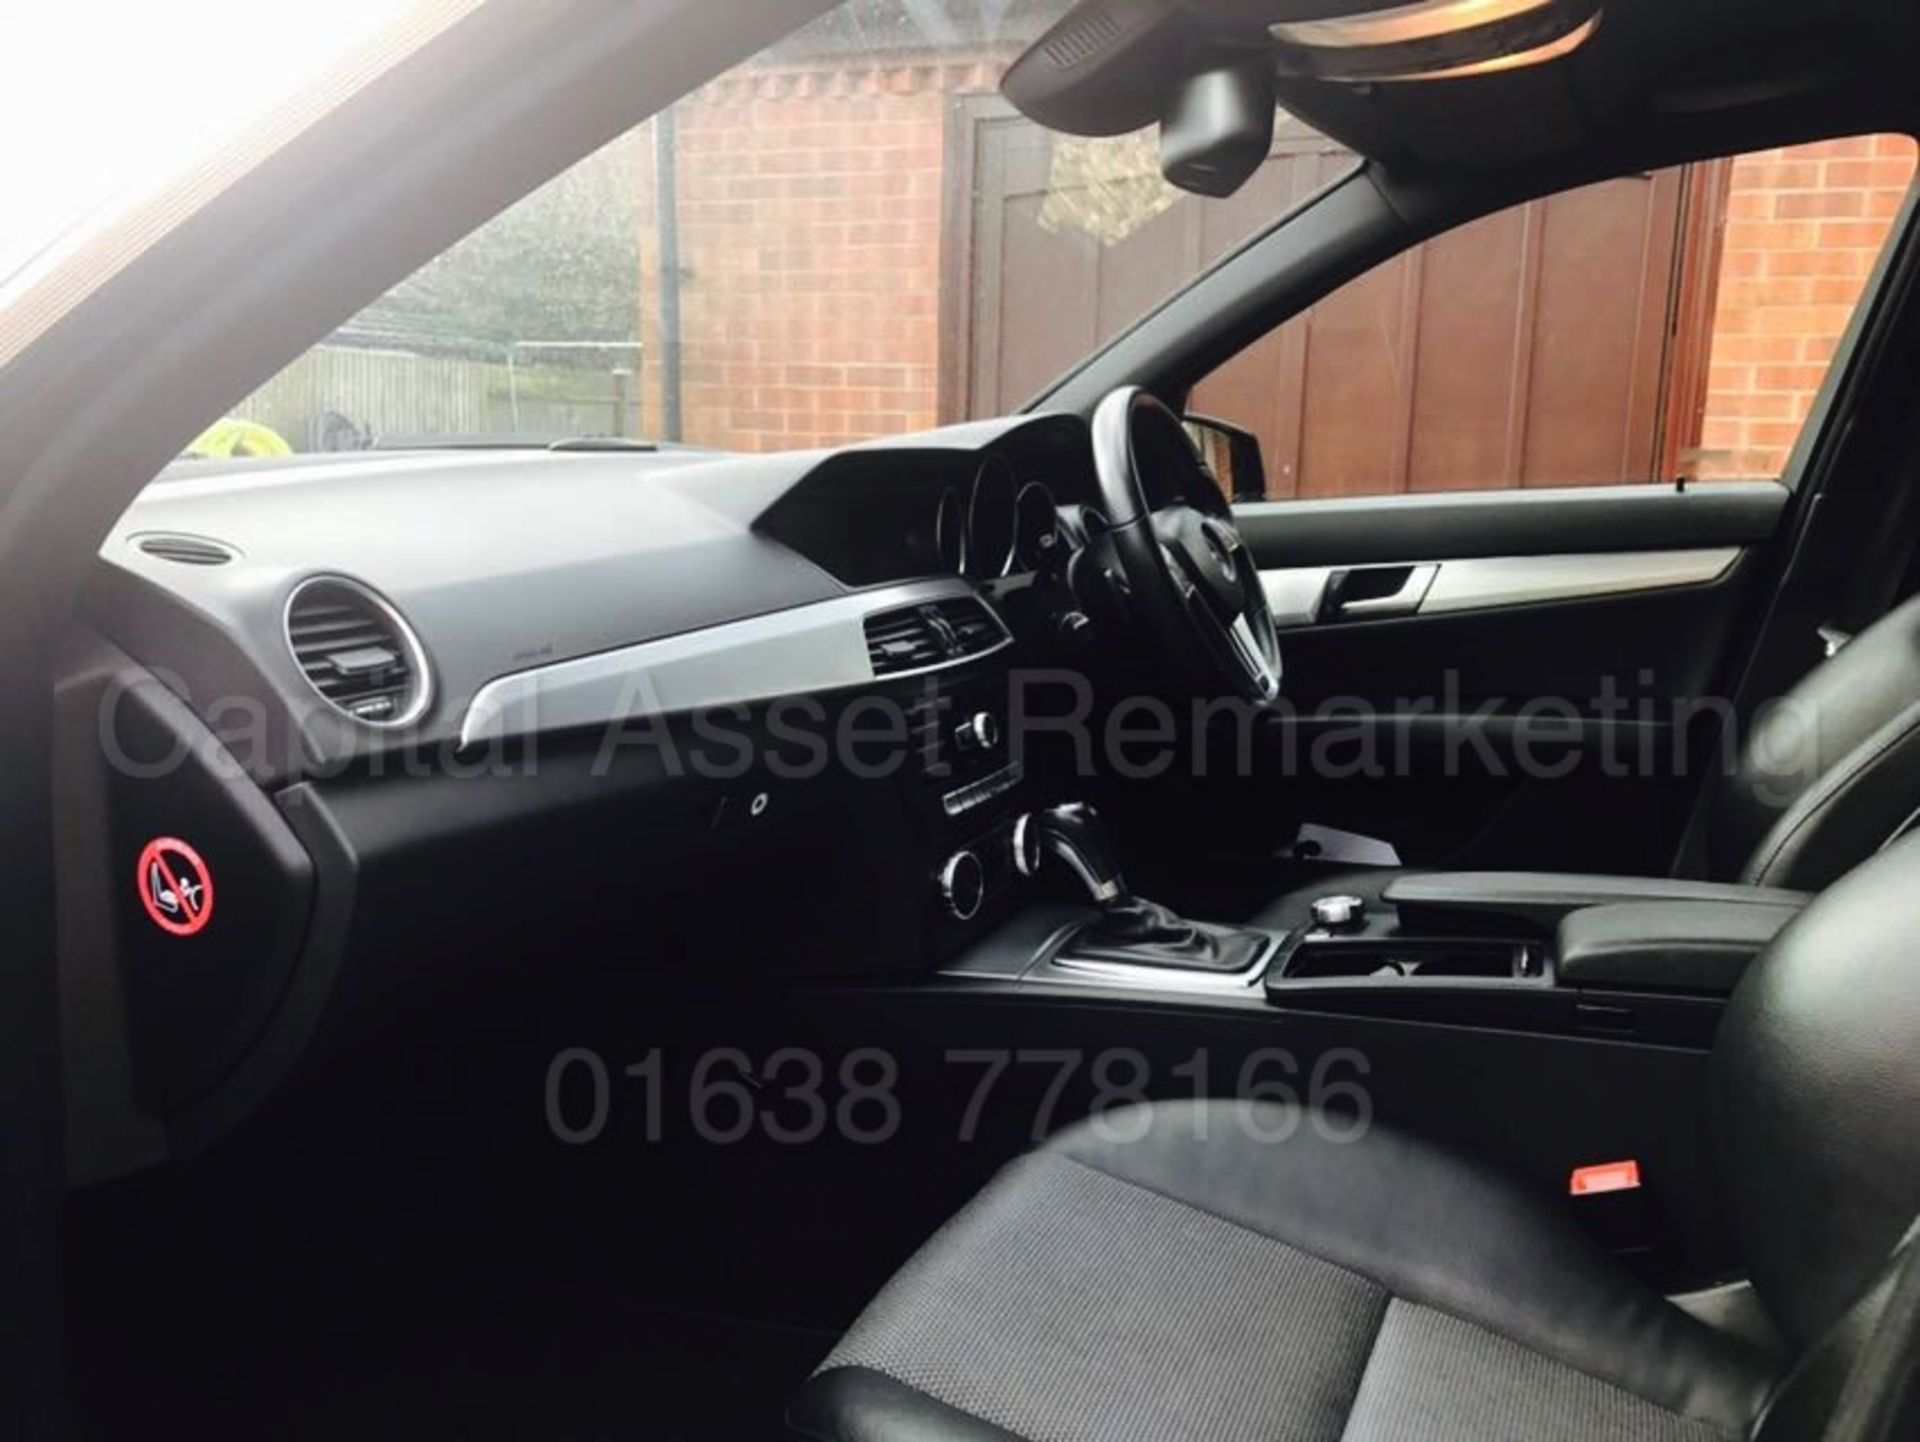 MERCEDES C220CDI "SPORT" ESTATE "125 EDITION" AUTOMATIC (2012 MODEL) SAT NAV - LEATHER - Image 10 of 19